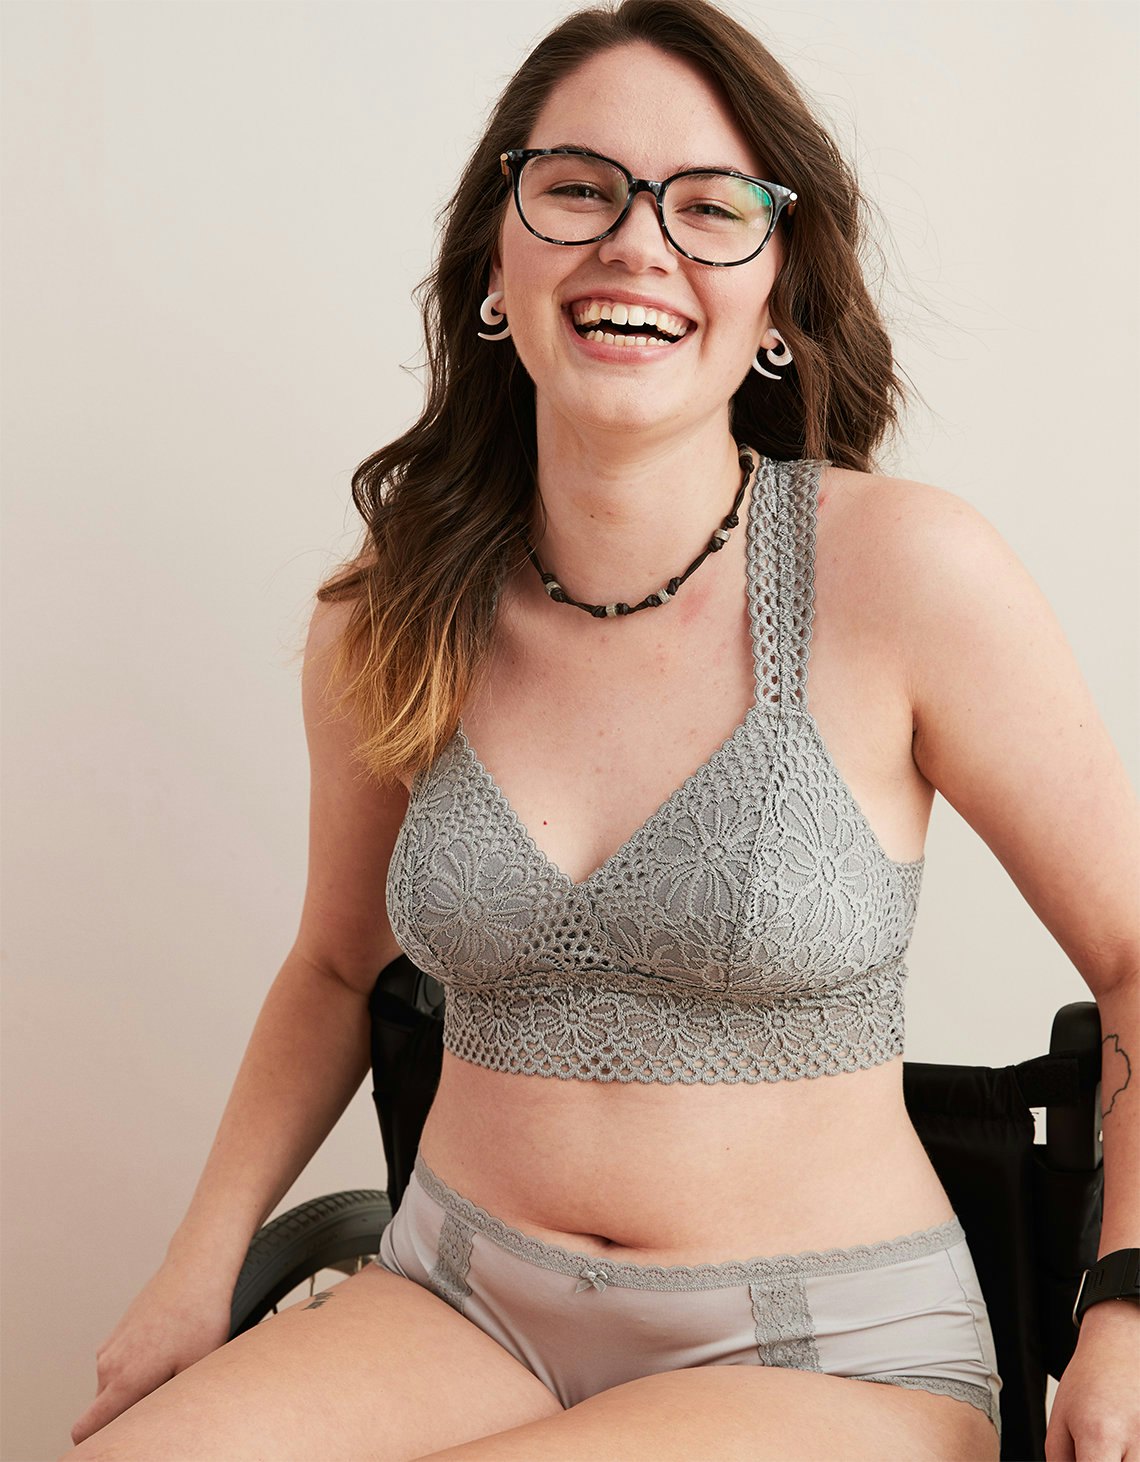 Why Aerie's 'Body Positive' Campaign Isn't